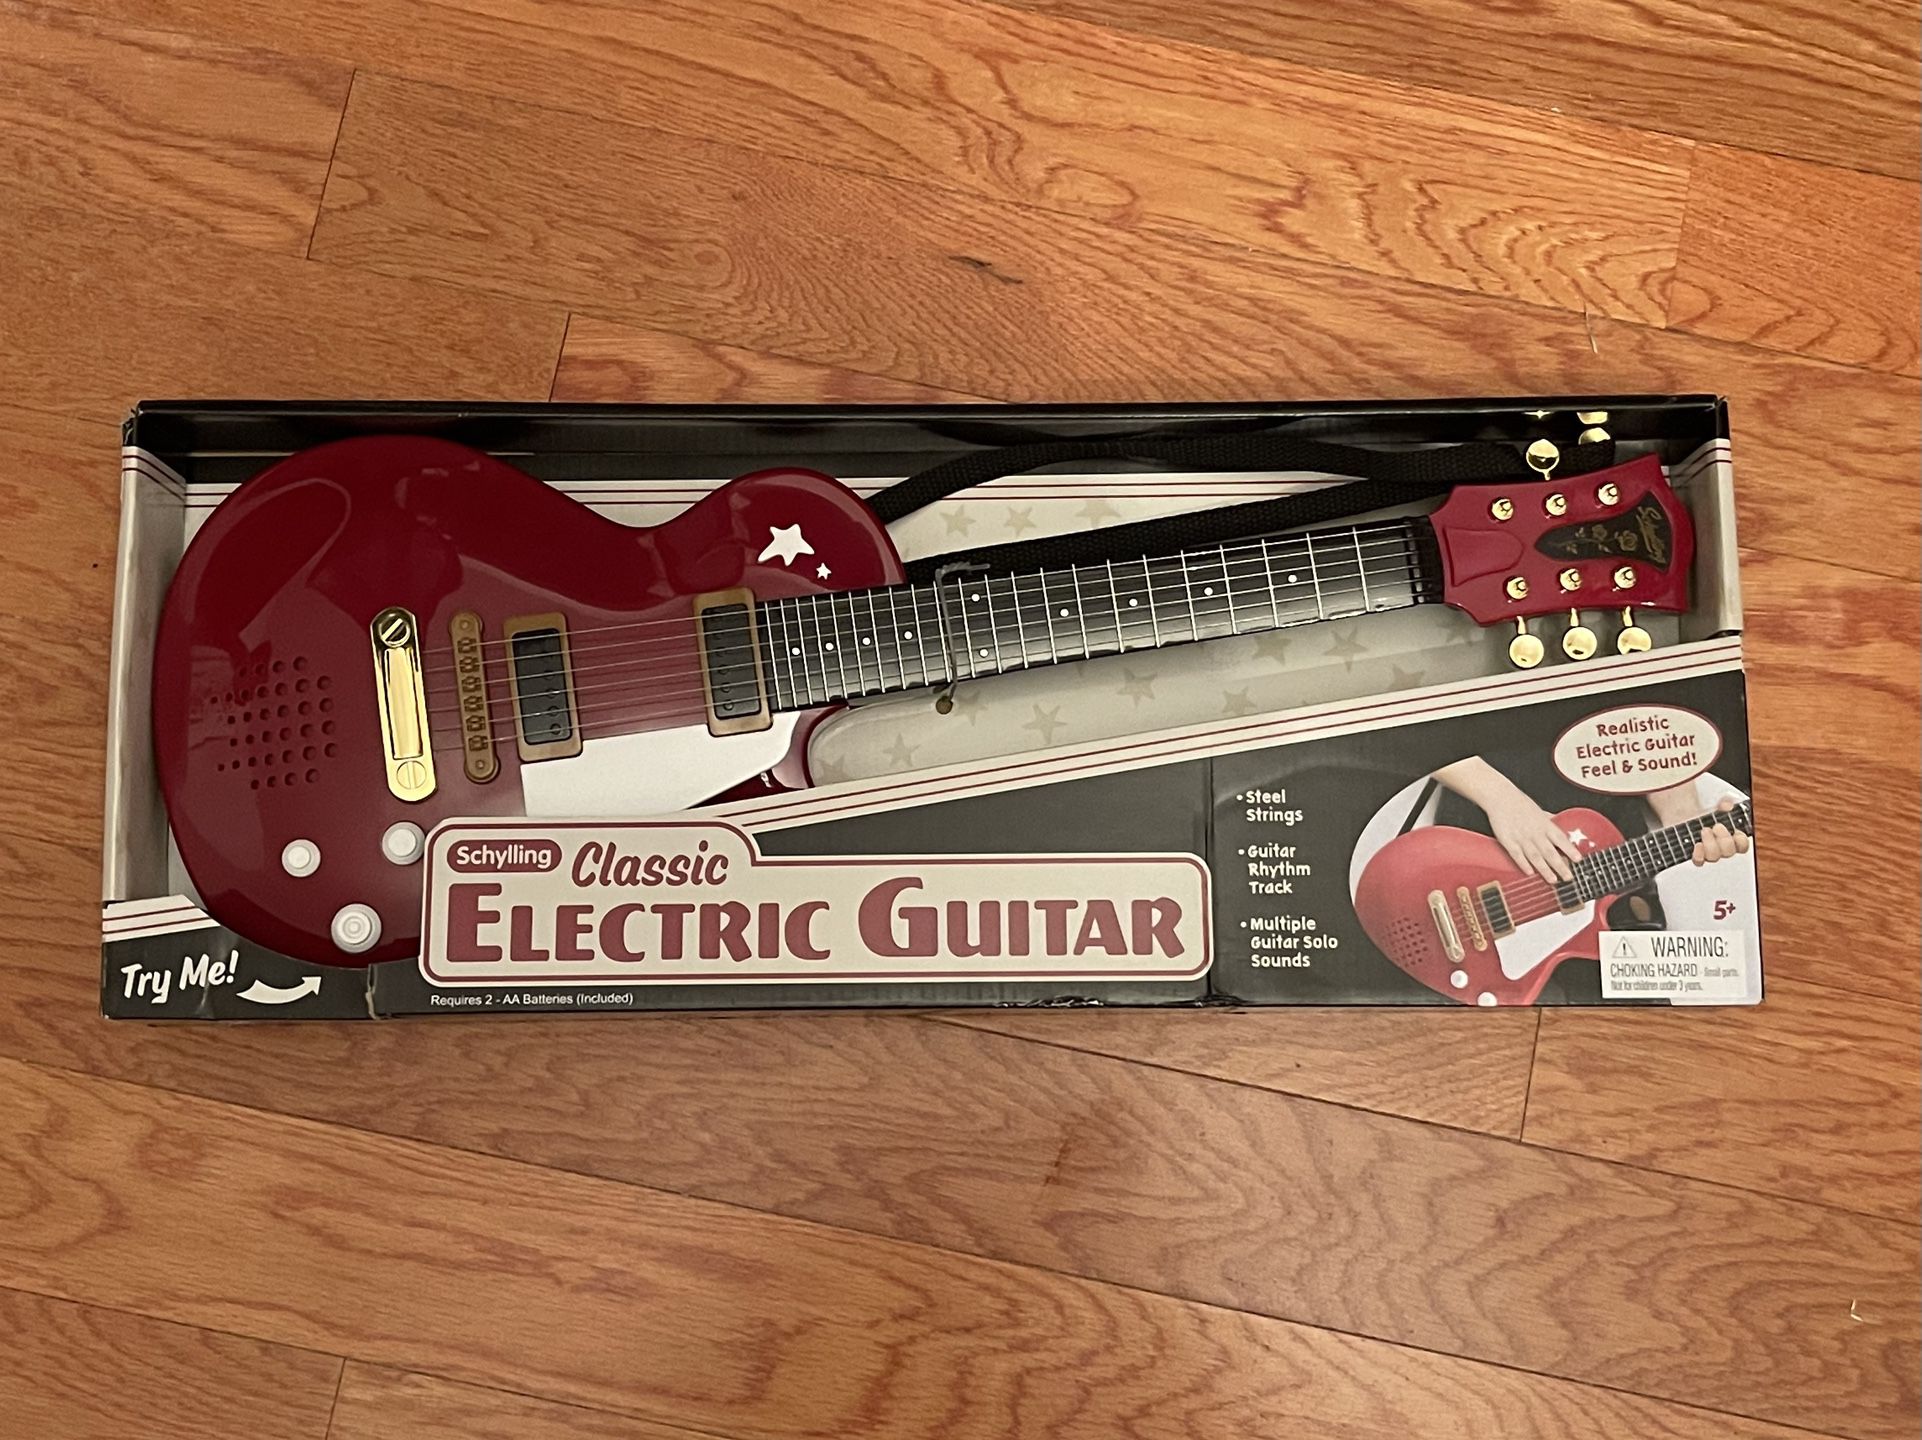 Electric Guitar, Toy In Box, Children’s, Schylling